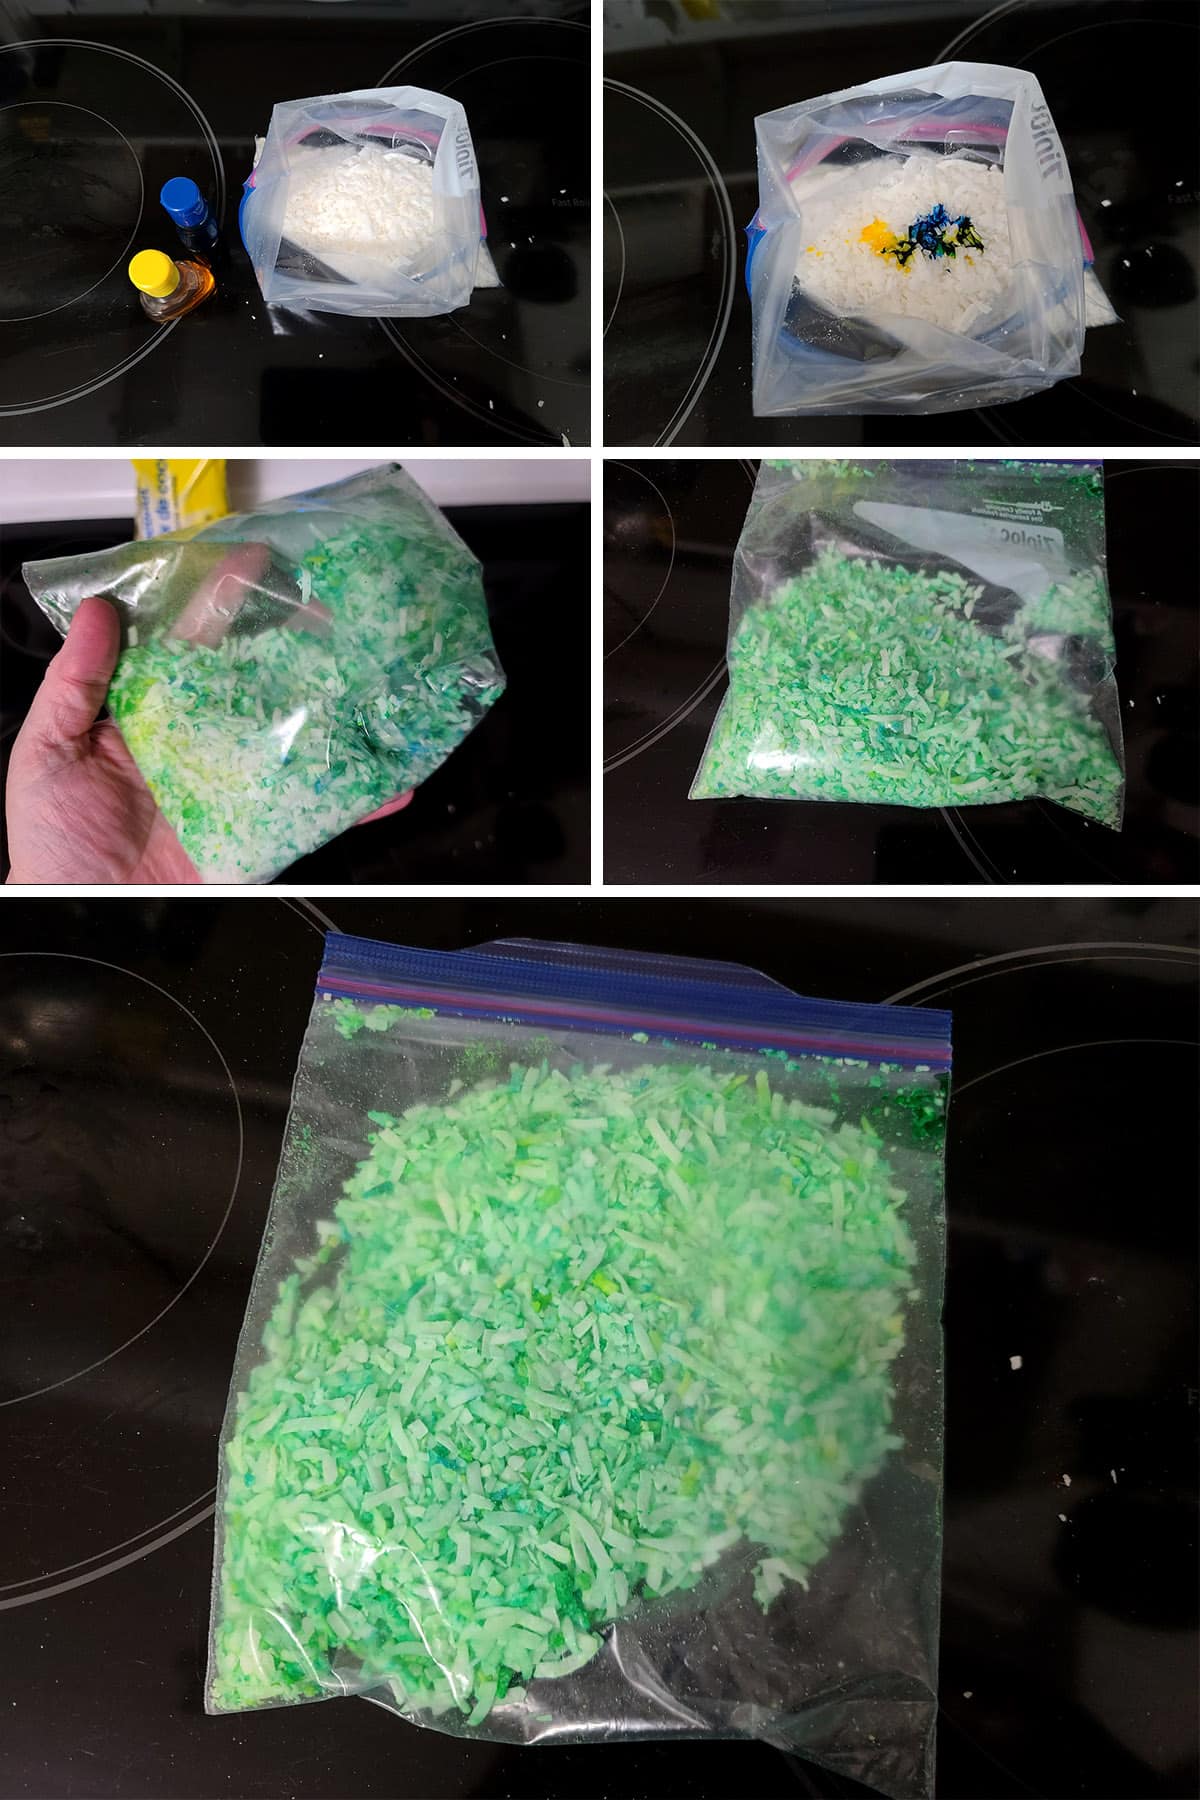 A 5 part image showing coconut flakes in a baggie with blue and yellow food coloring, mixed into green coconut.